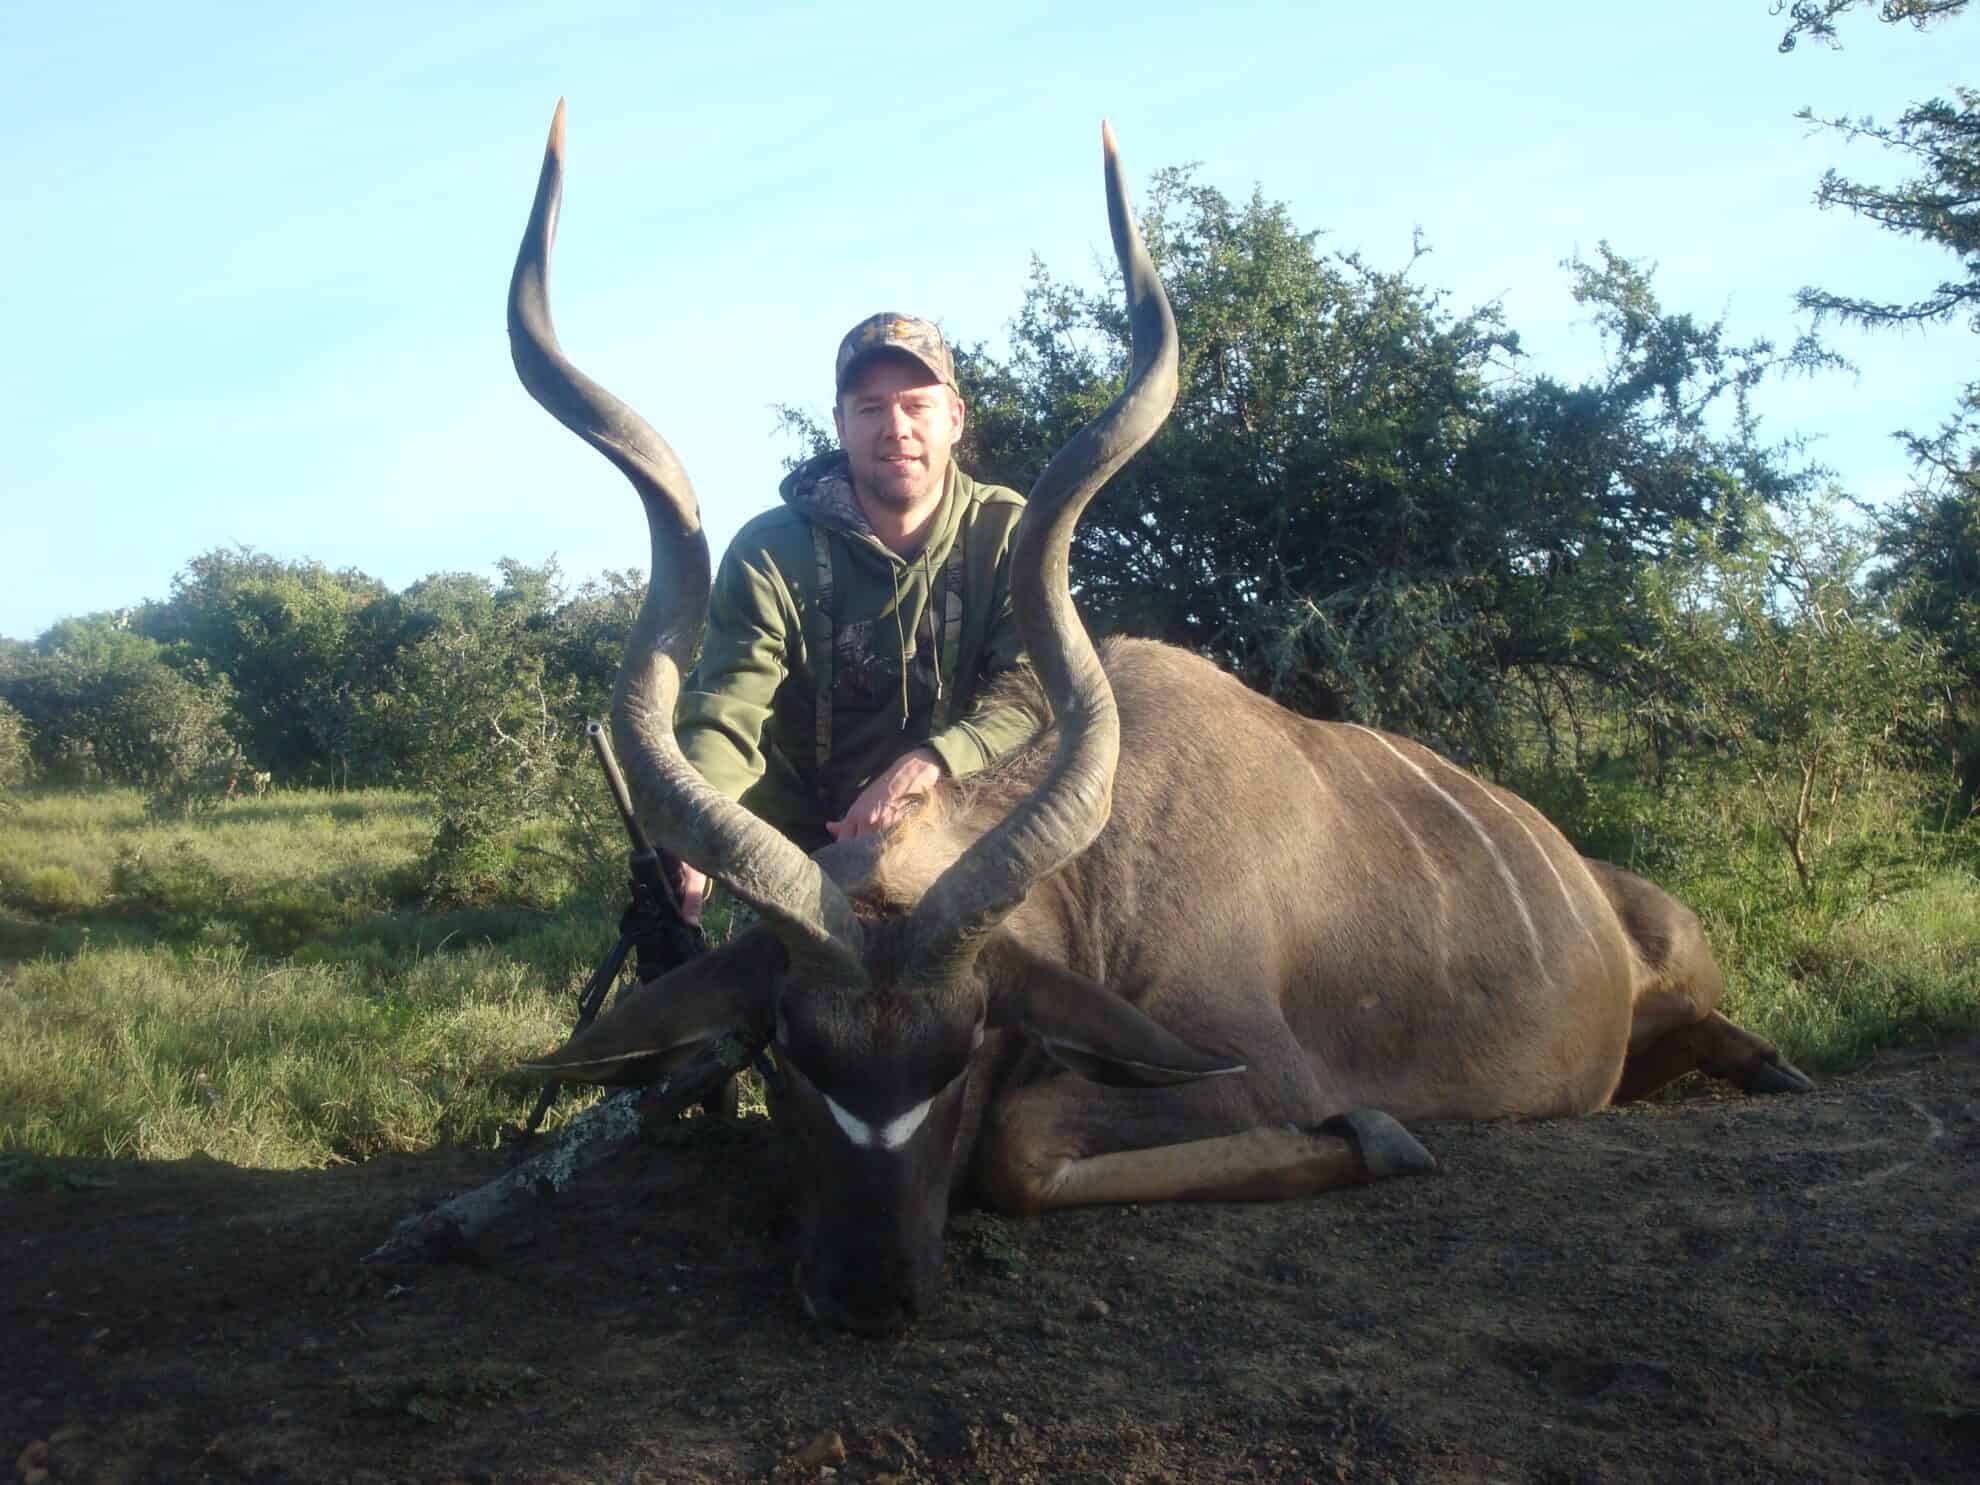 AfricaHunting recommends Nick Bowker Hunting.